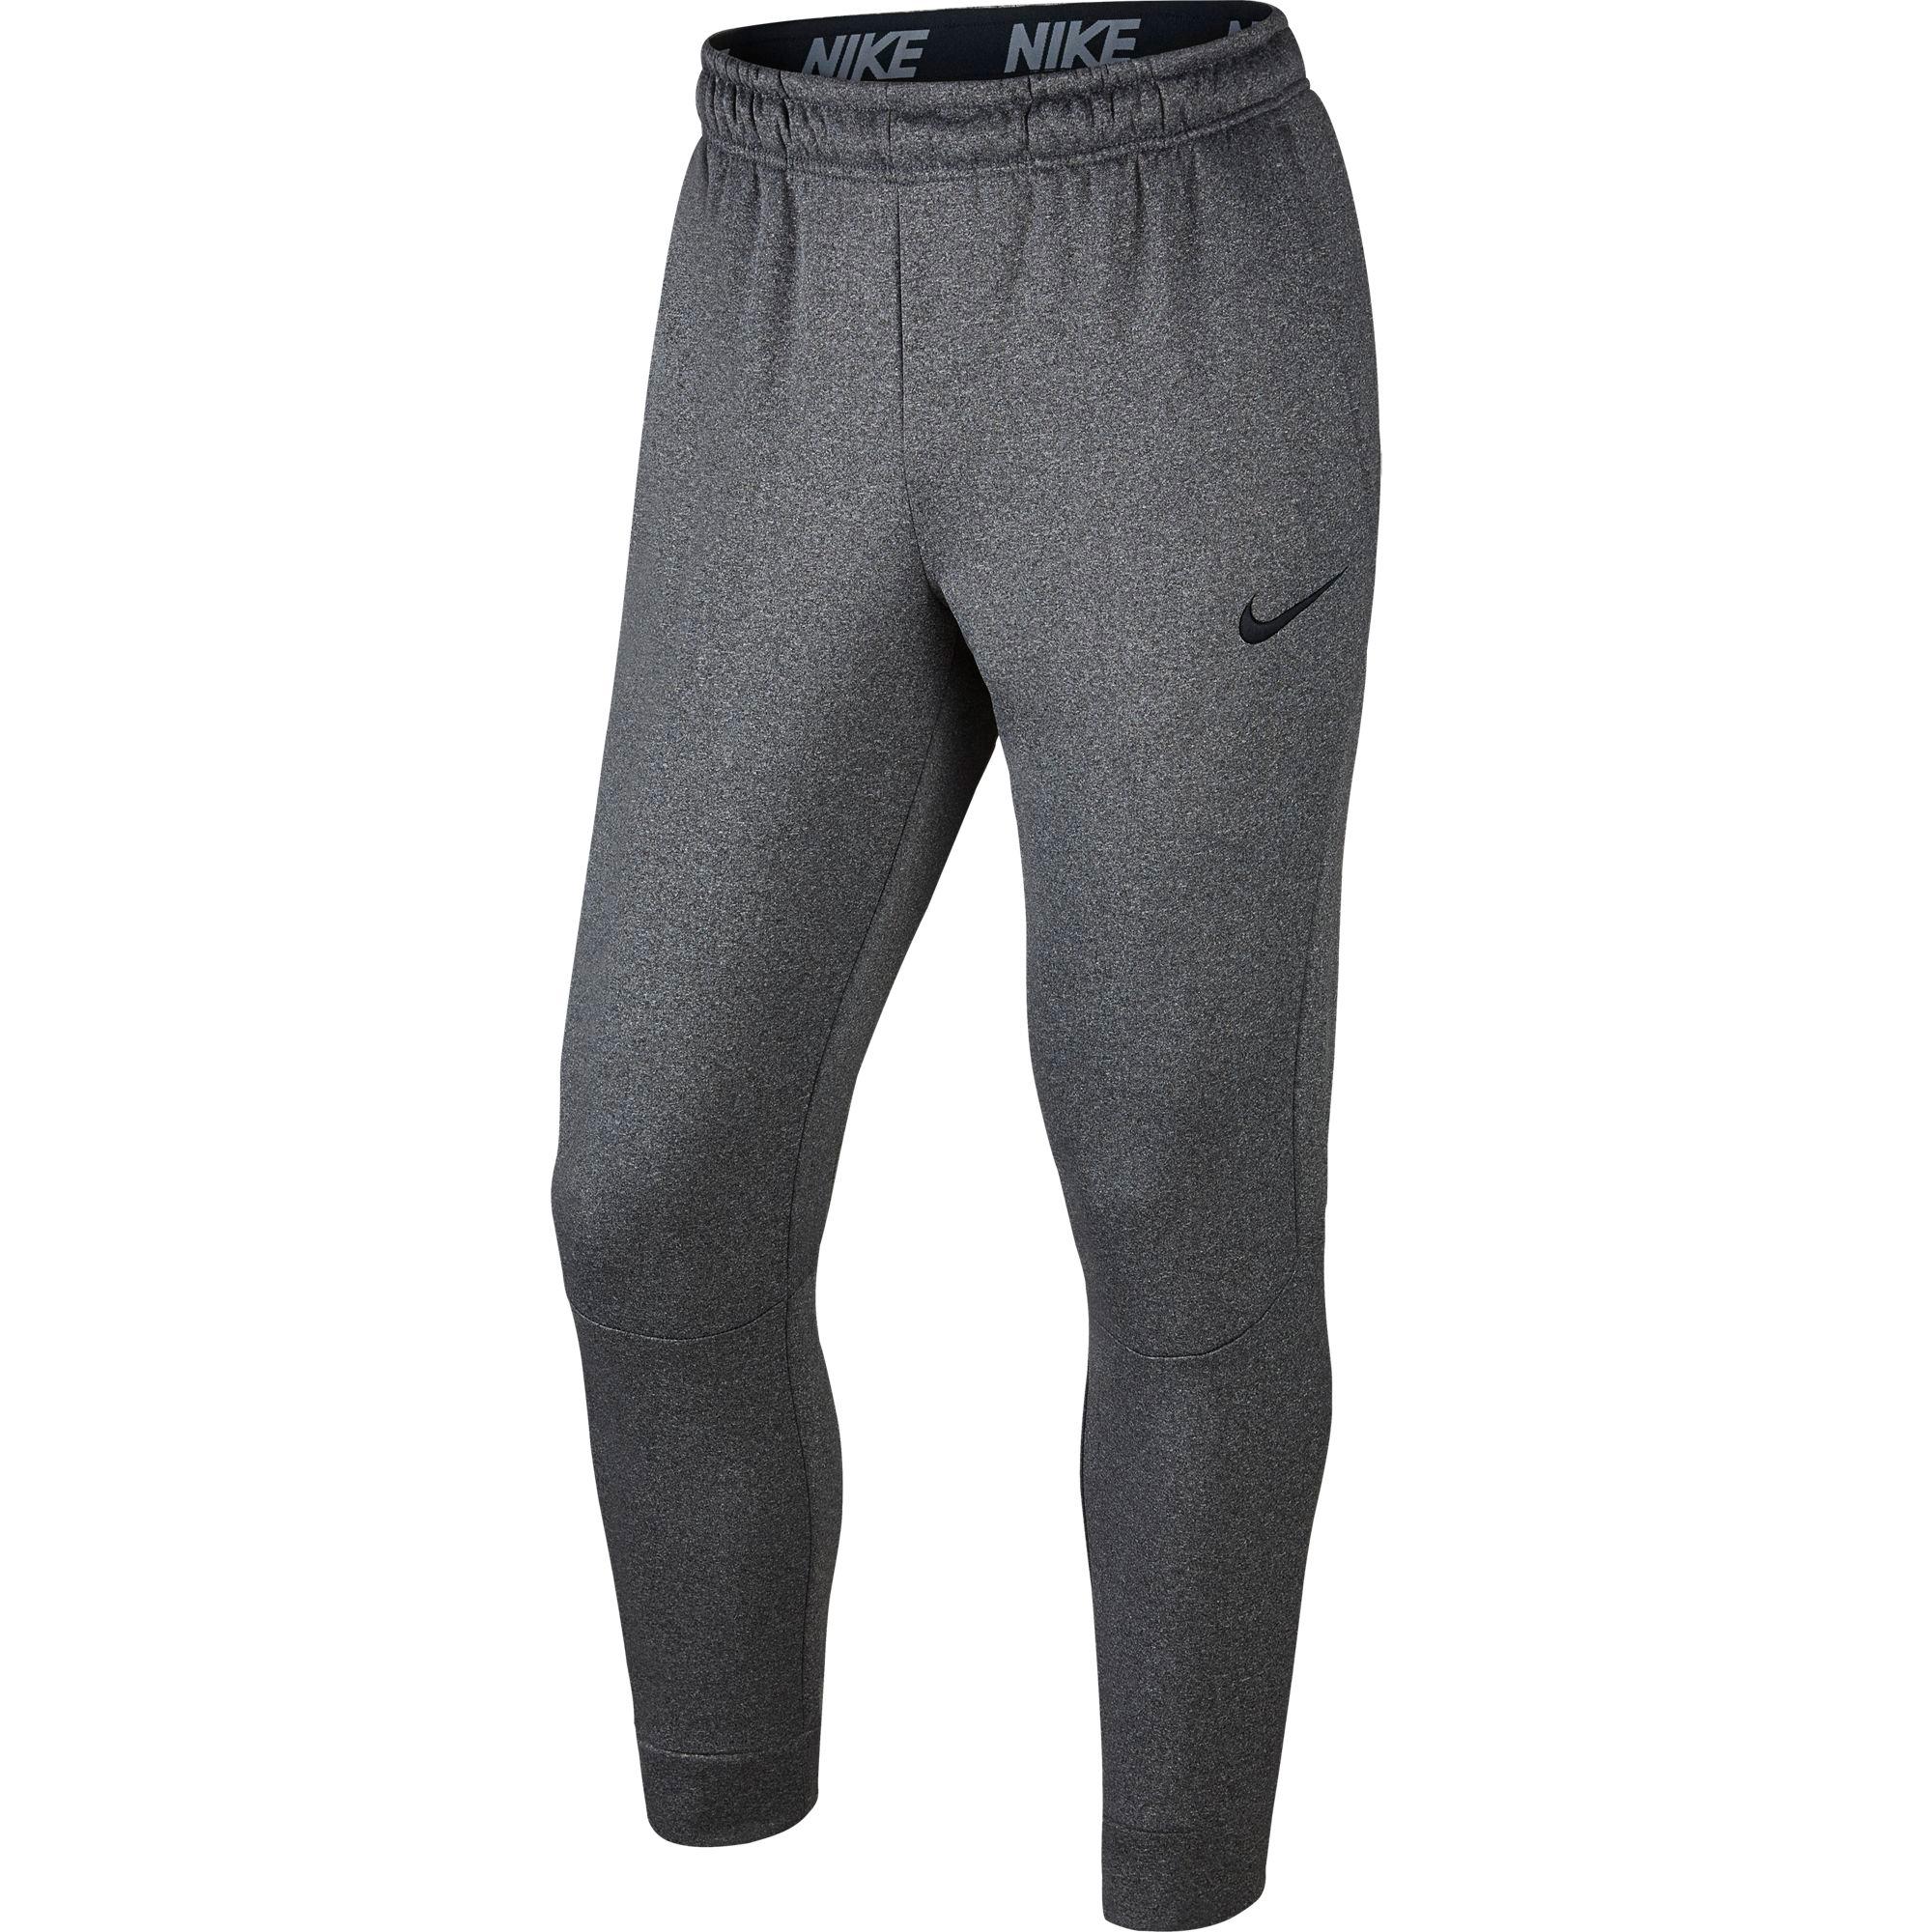 6 Day Gray workout pants for Women